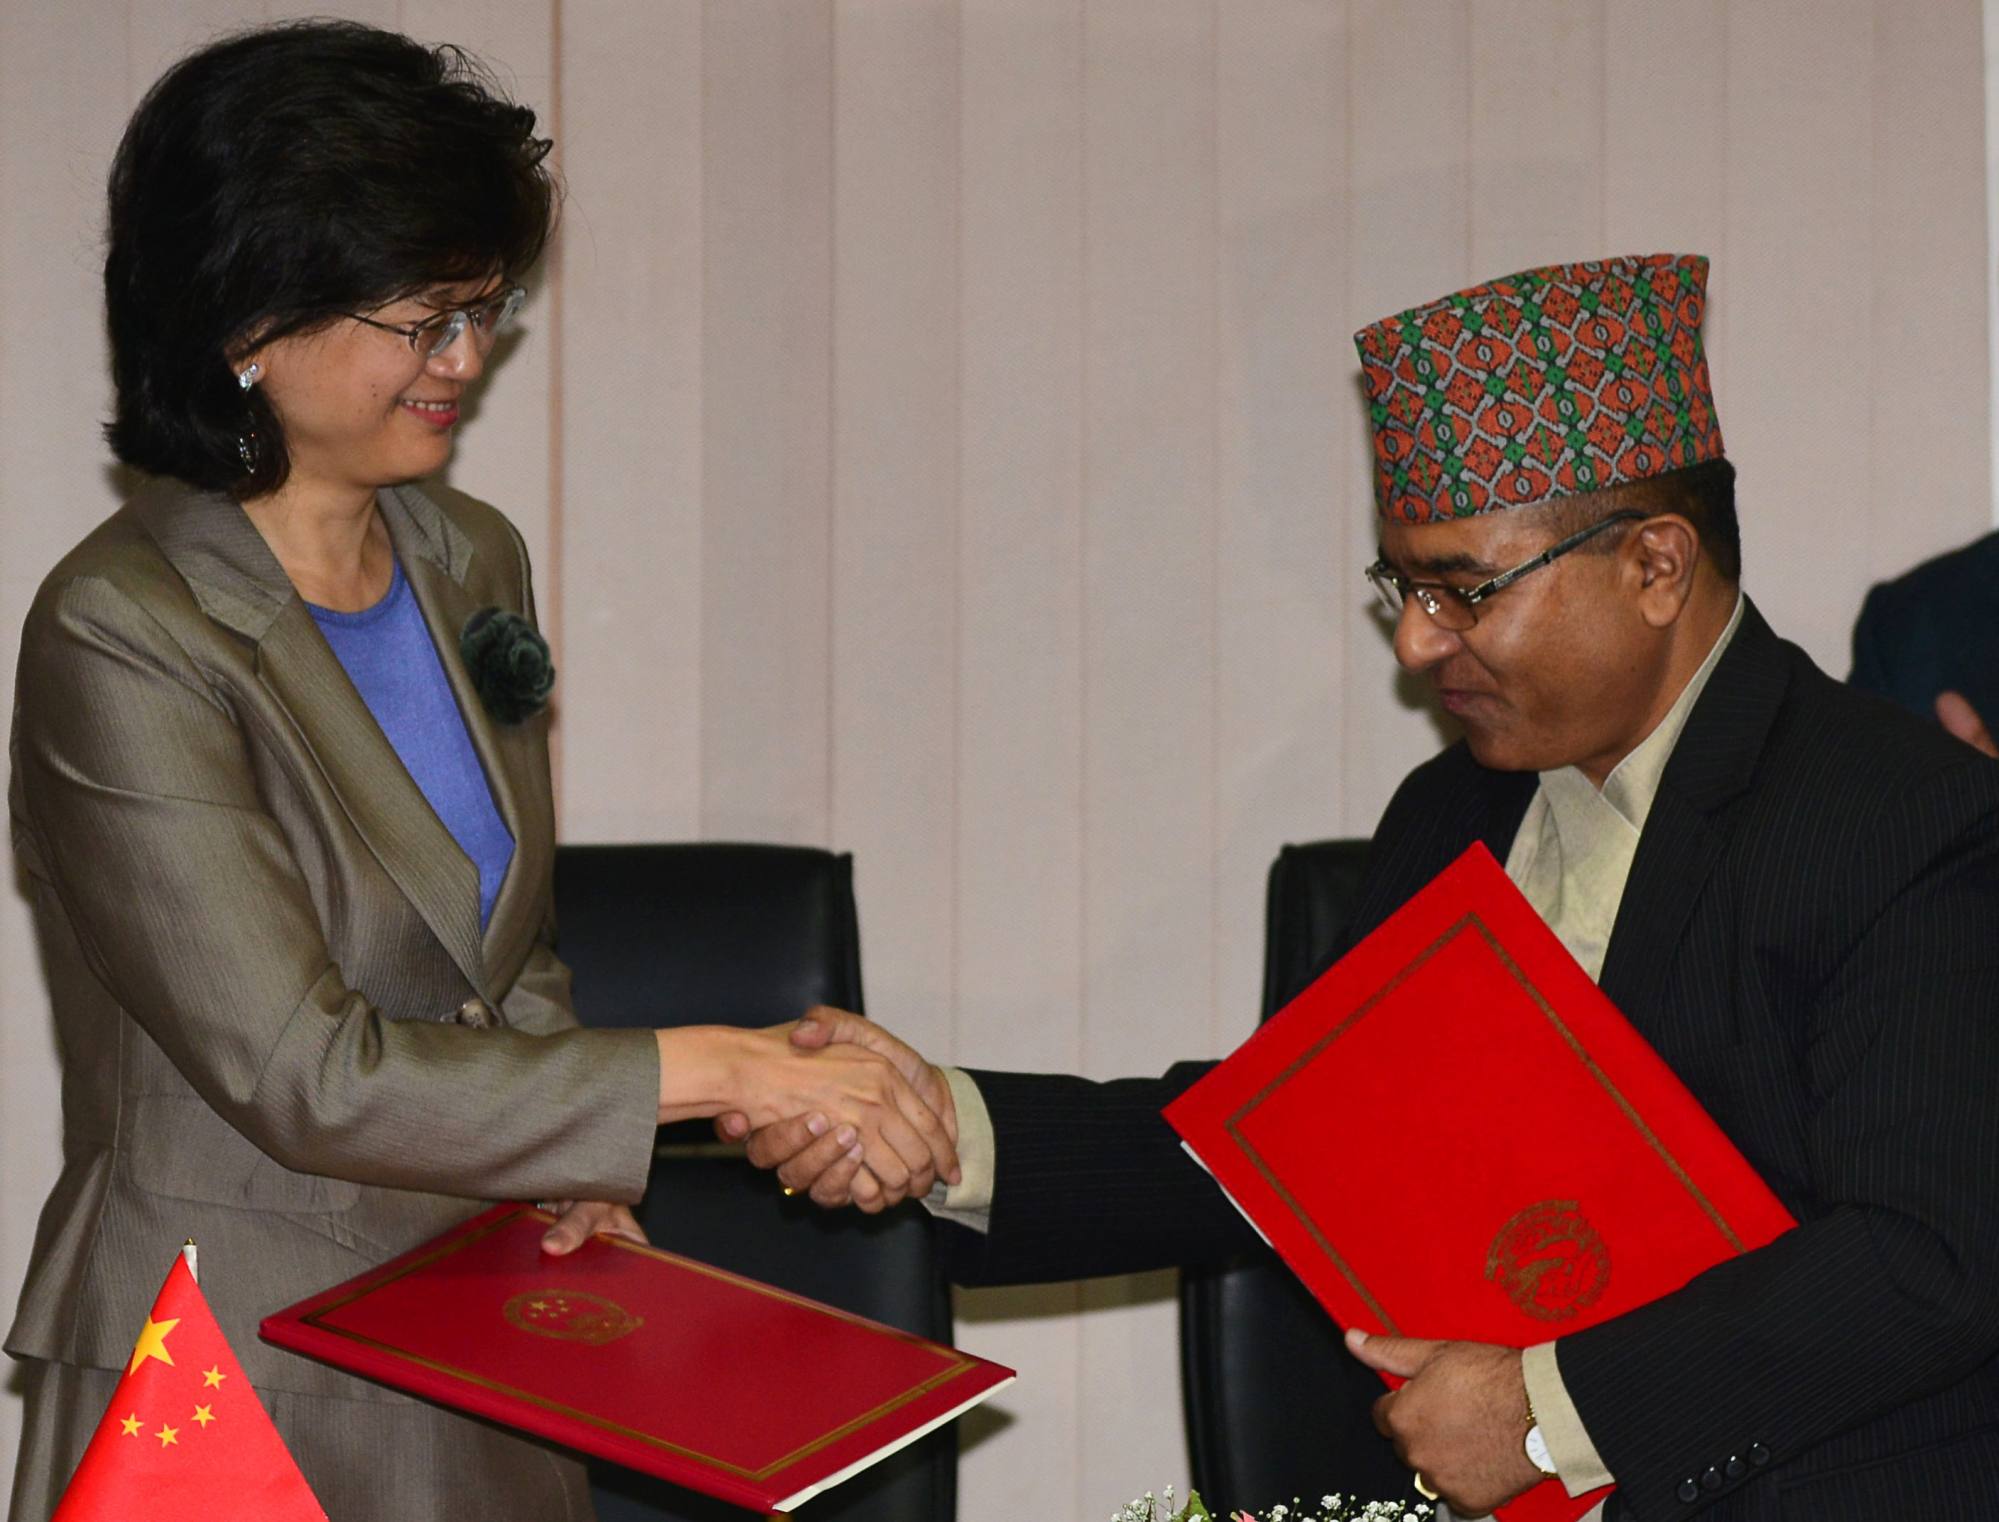 Nepal’s Foreign Secretary Shankar Das Bairagi and China’s Ambassador to Nepal Yu Hong (left) exchange documents during a signing ceremony relating to the Belt One Road initiative in Kathmandu in May 2017. File photo: AFP